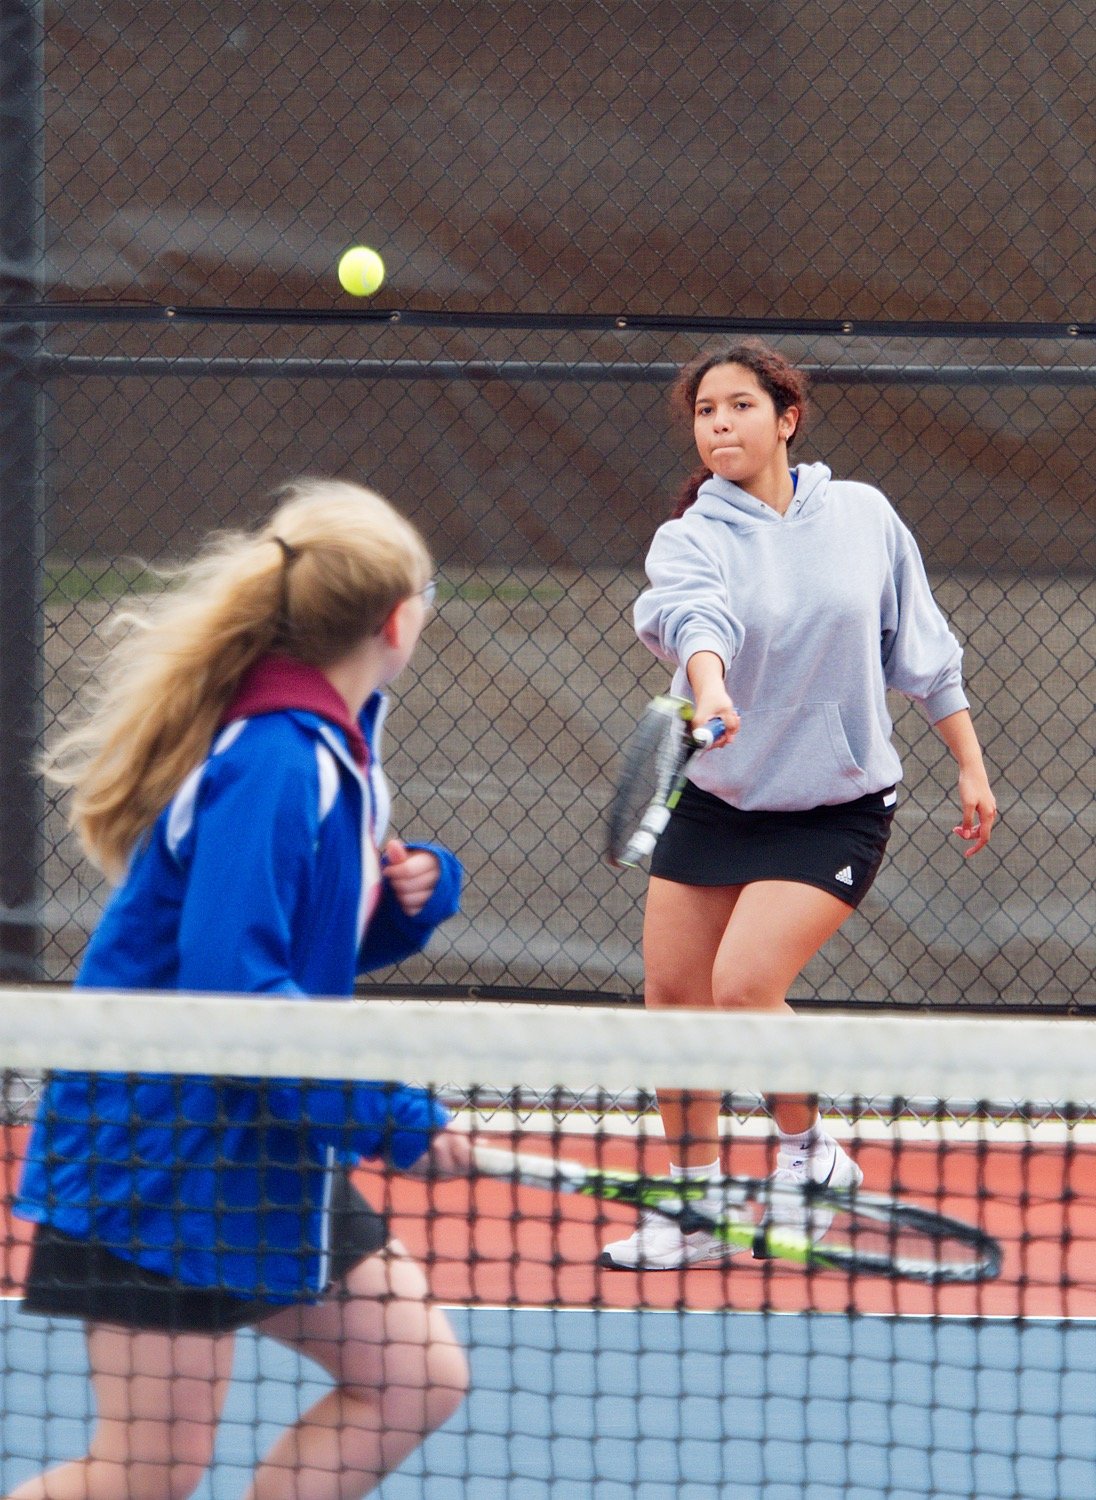 Emily Roman plays a forehand from the baseline as Tristan Wood gets in position at the net. [view more volleys]